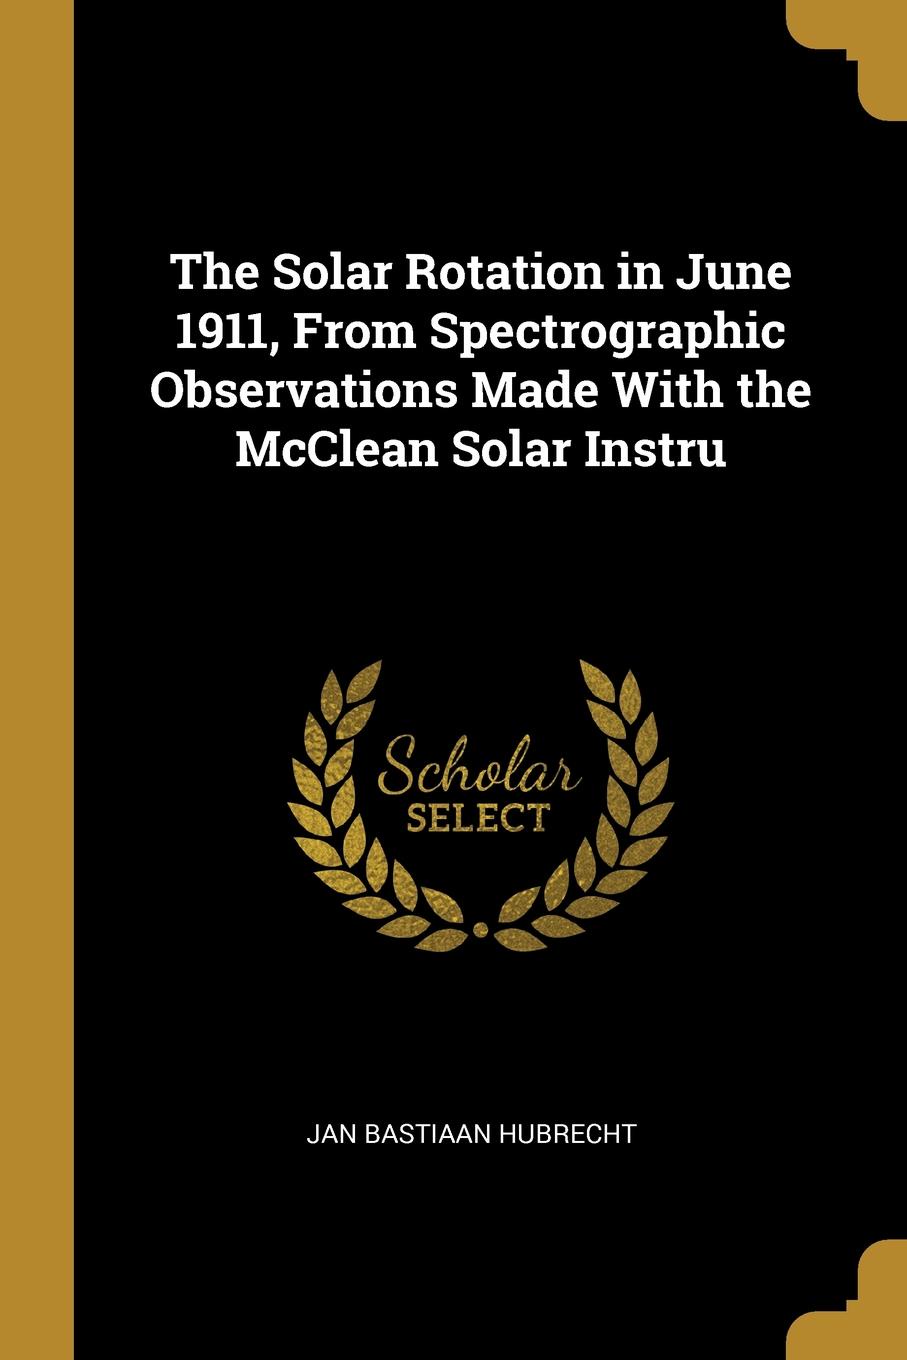 The Solar Rotation in June 1911, From Spectrographic Observations Made With the McClean Solar Instru